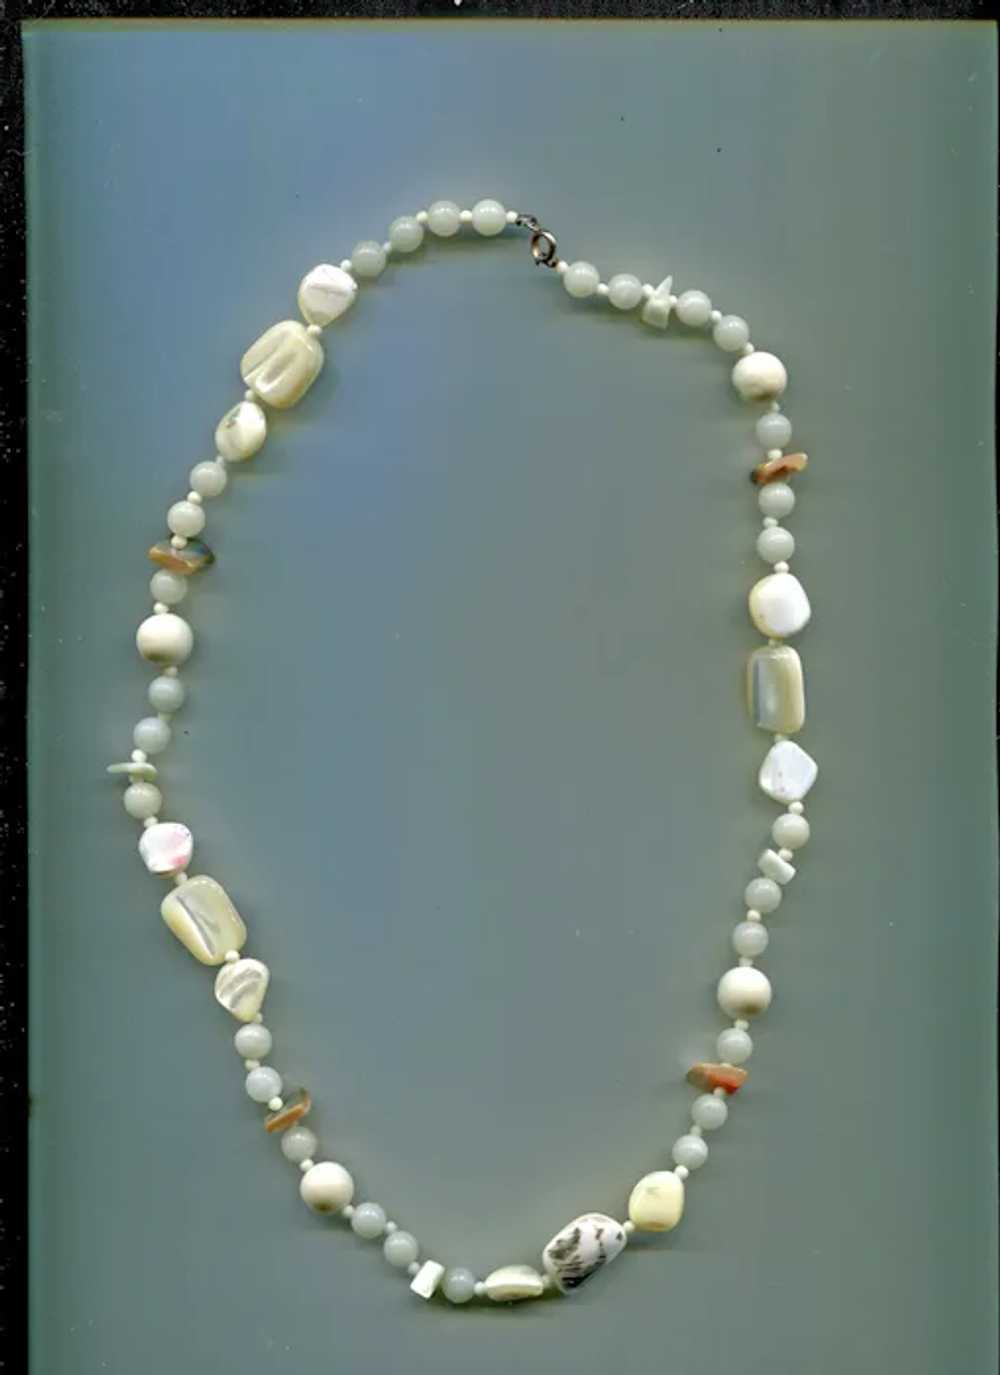 White Milk Glass Necklace with Splashes of Gray - image 2